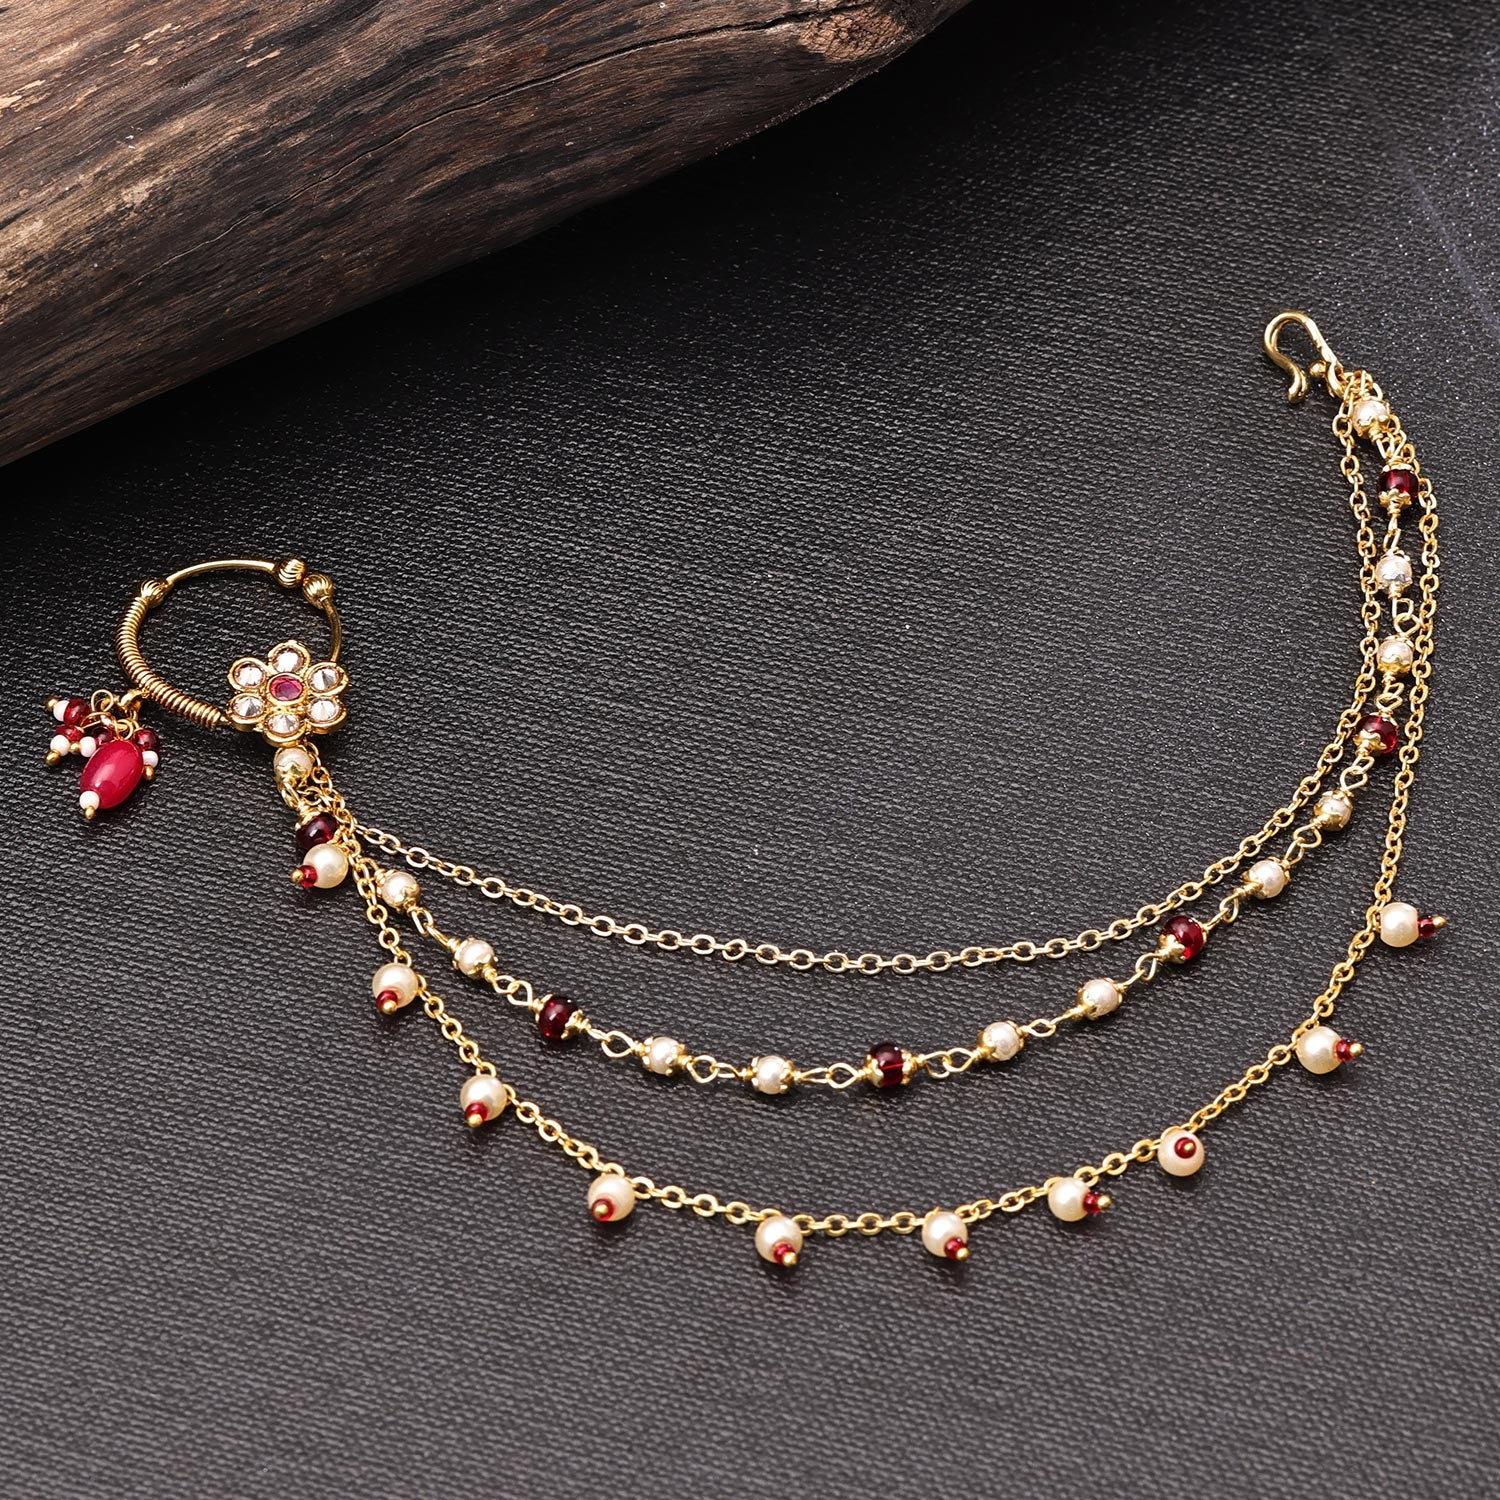 Stylish Gold Nose Rings and Stone Bangles